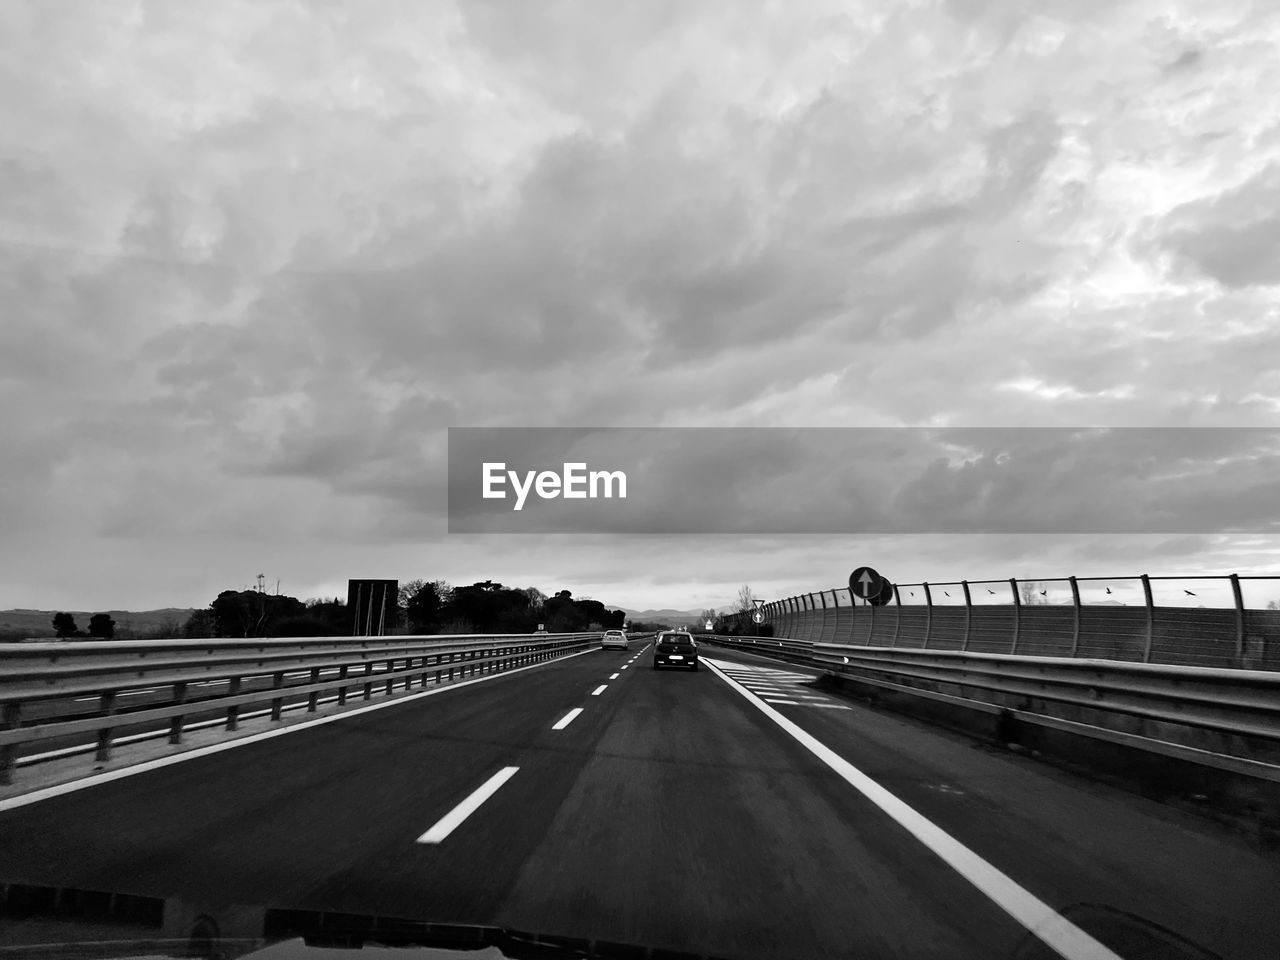 transportation, road, black and white, sky, cloud, monochrome, highway, monochrome photography, mode of transportation, travel, black, car, nature, sign, white, motor vehicle, horizon, symbol, architecture, marking, the way forward, road marking, freeway, no people, city, bridge, outdoors, infrastructure, lane, motion, vanishing point, street, land vehicle, line, built structure, day, on the move, diminishing perspective, multiple lane highway, travel destinations